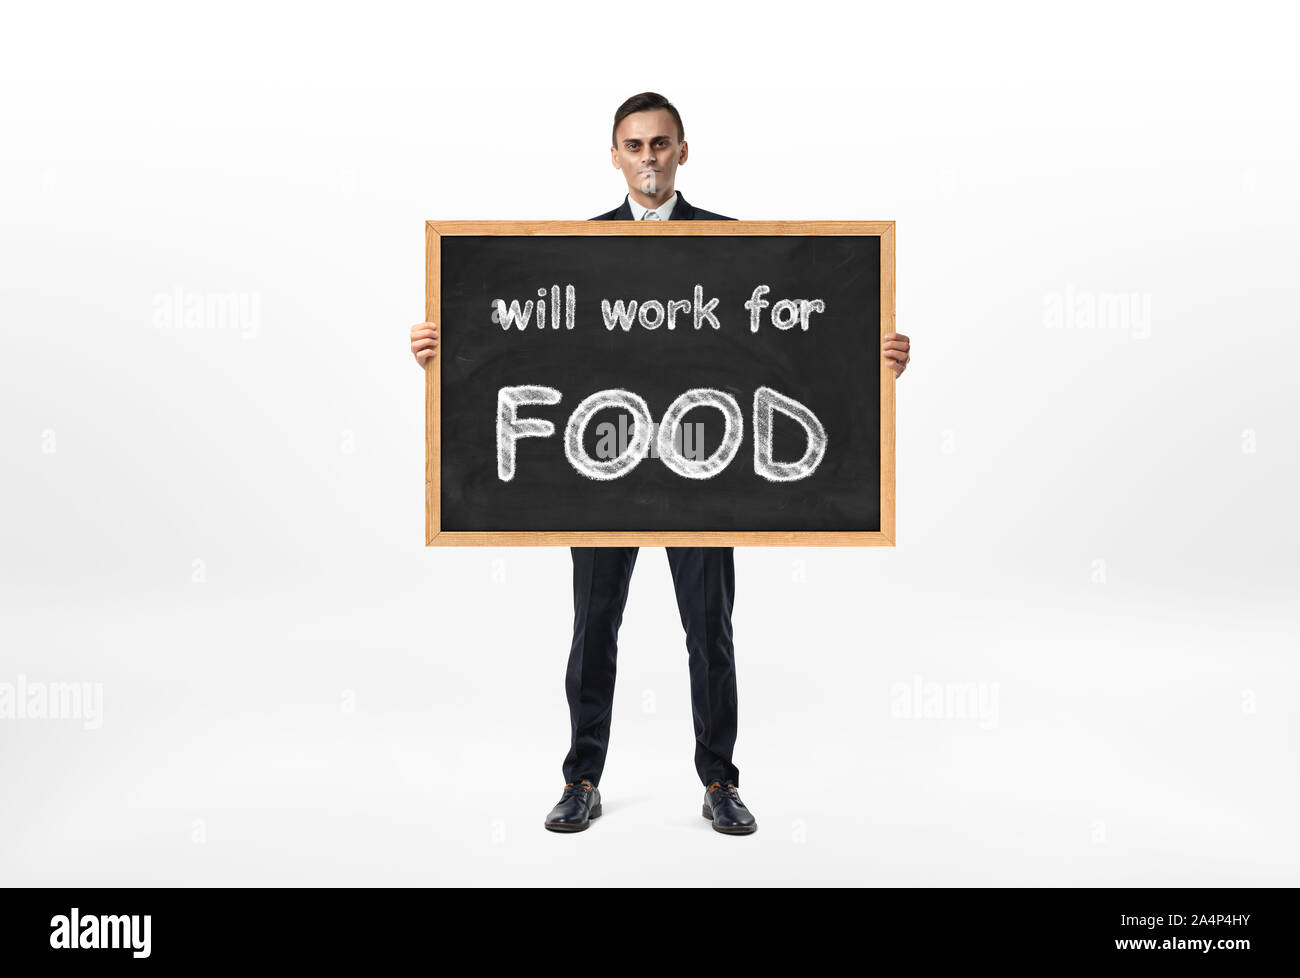 Businessman standing and holding blackboard with words 'will work for food' written on it Stock Photo